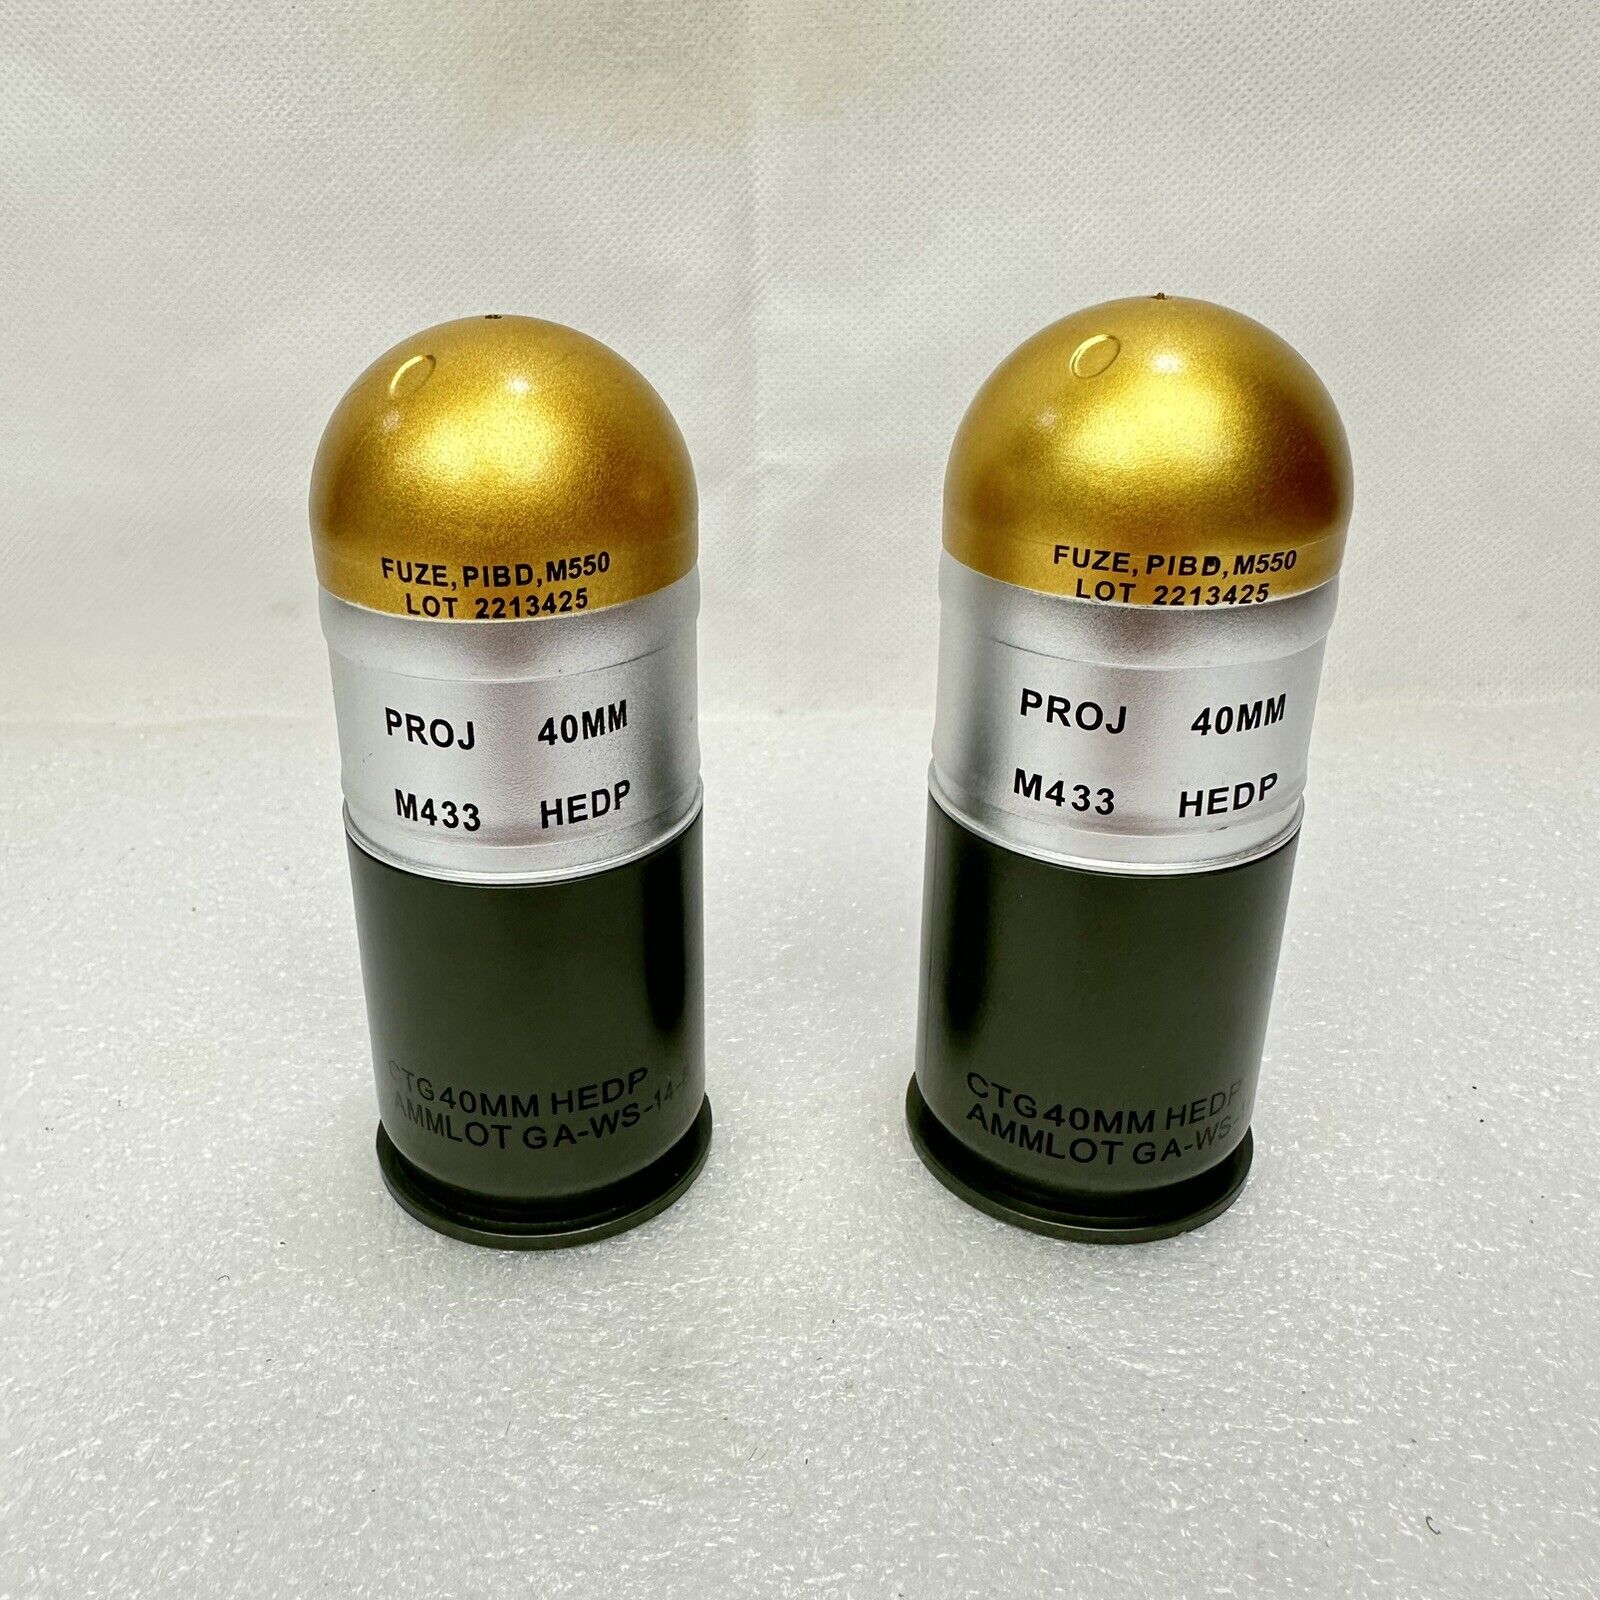 2 - Replica Inert 1:1 Scale 40MM HEDP M433 Fake Non Functional M203 M32A1 M320